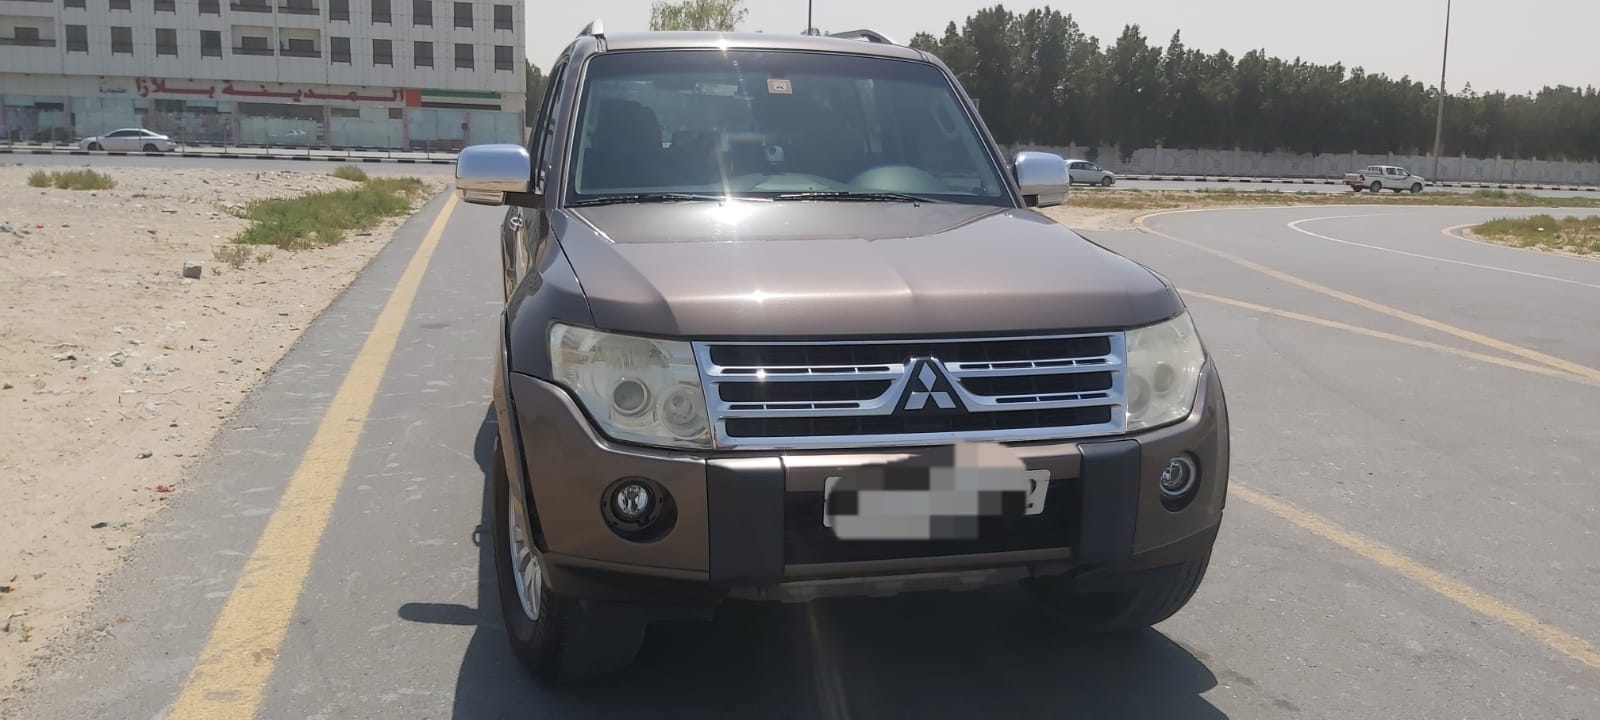 Single owner 2010 pajero for sale